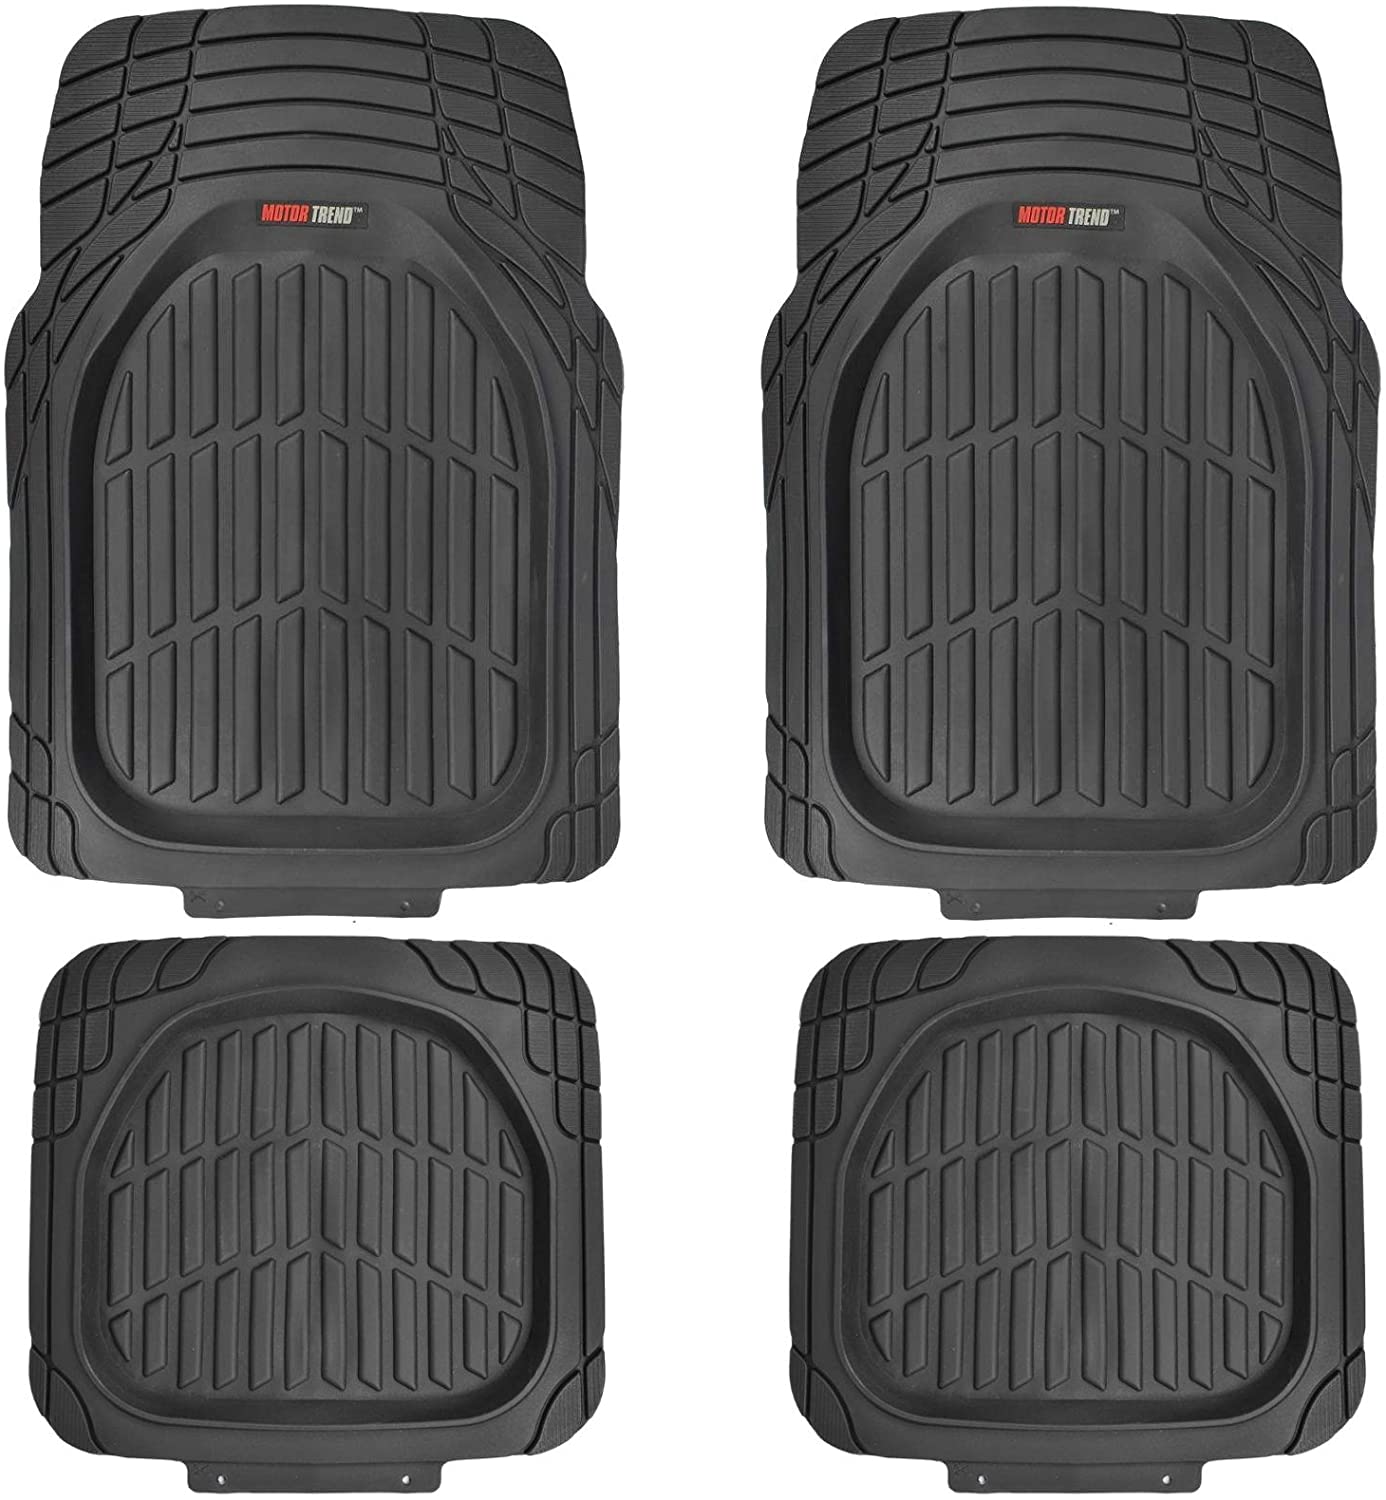 MotorTrend FlexTough Tortoise, Heavy-Duty Rubber Floor Mats for All Weather  Protection, Deep Dish